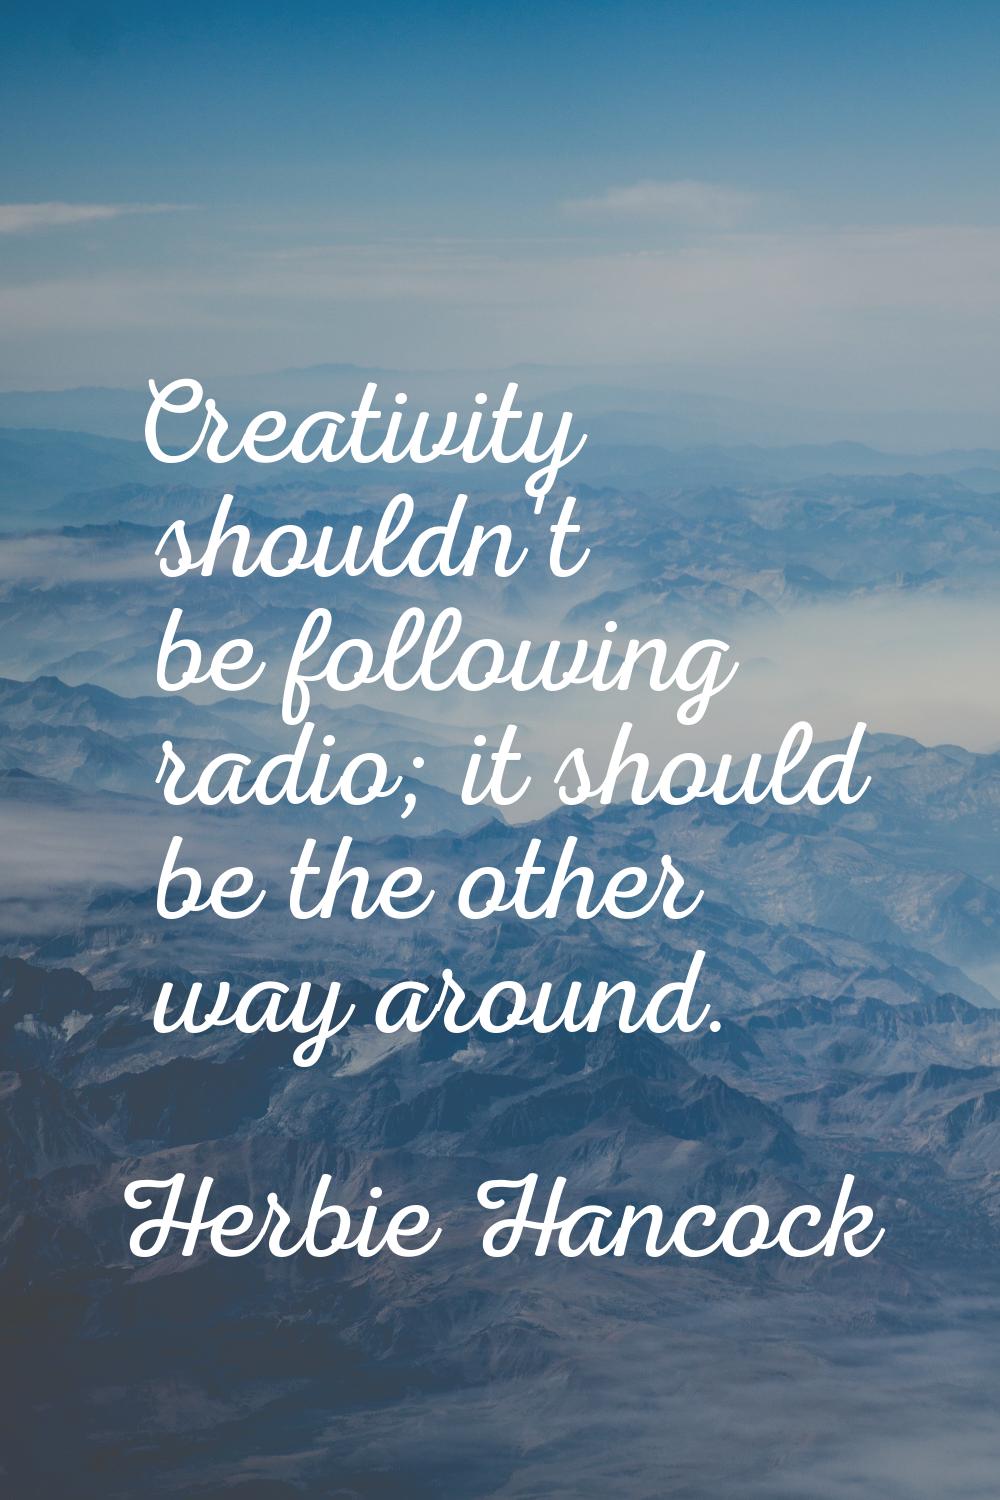 Creativity shouldn't be following radio; it should be the other way around.